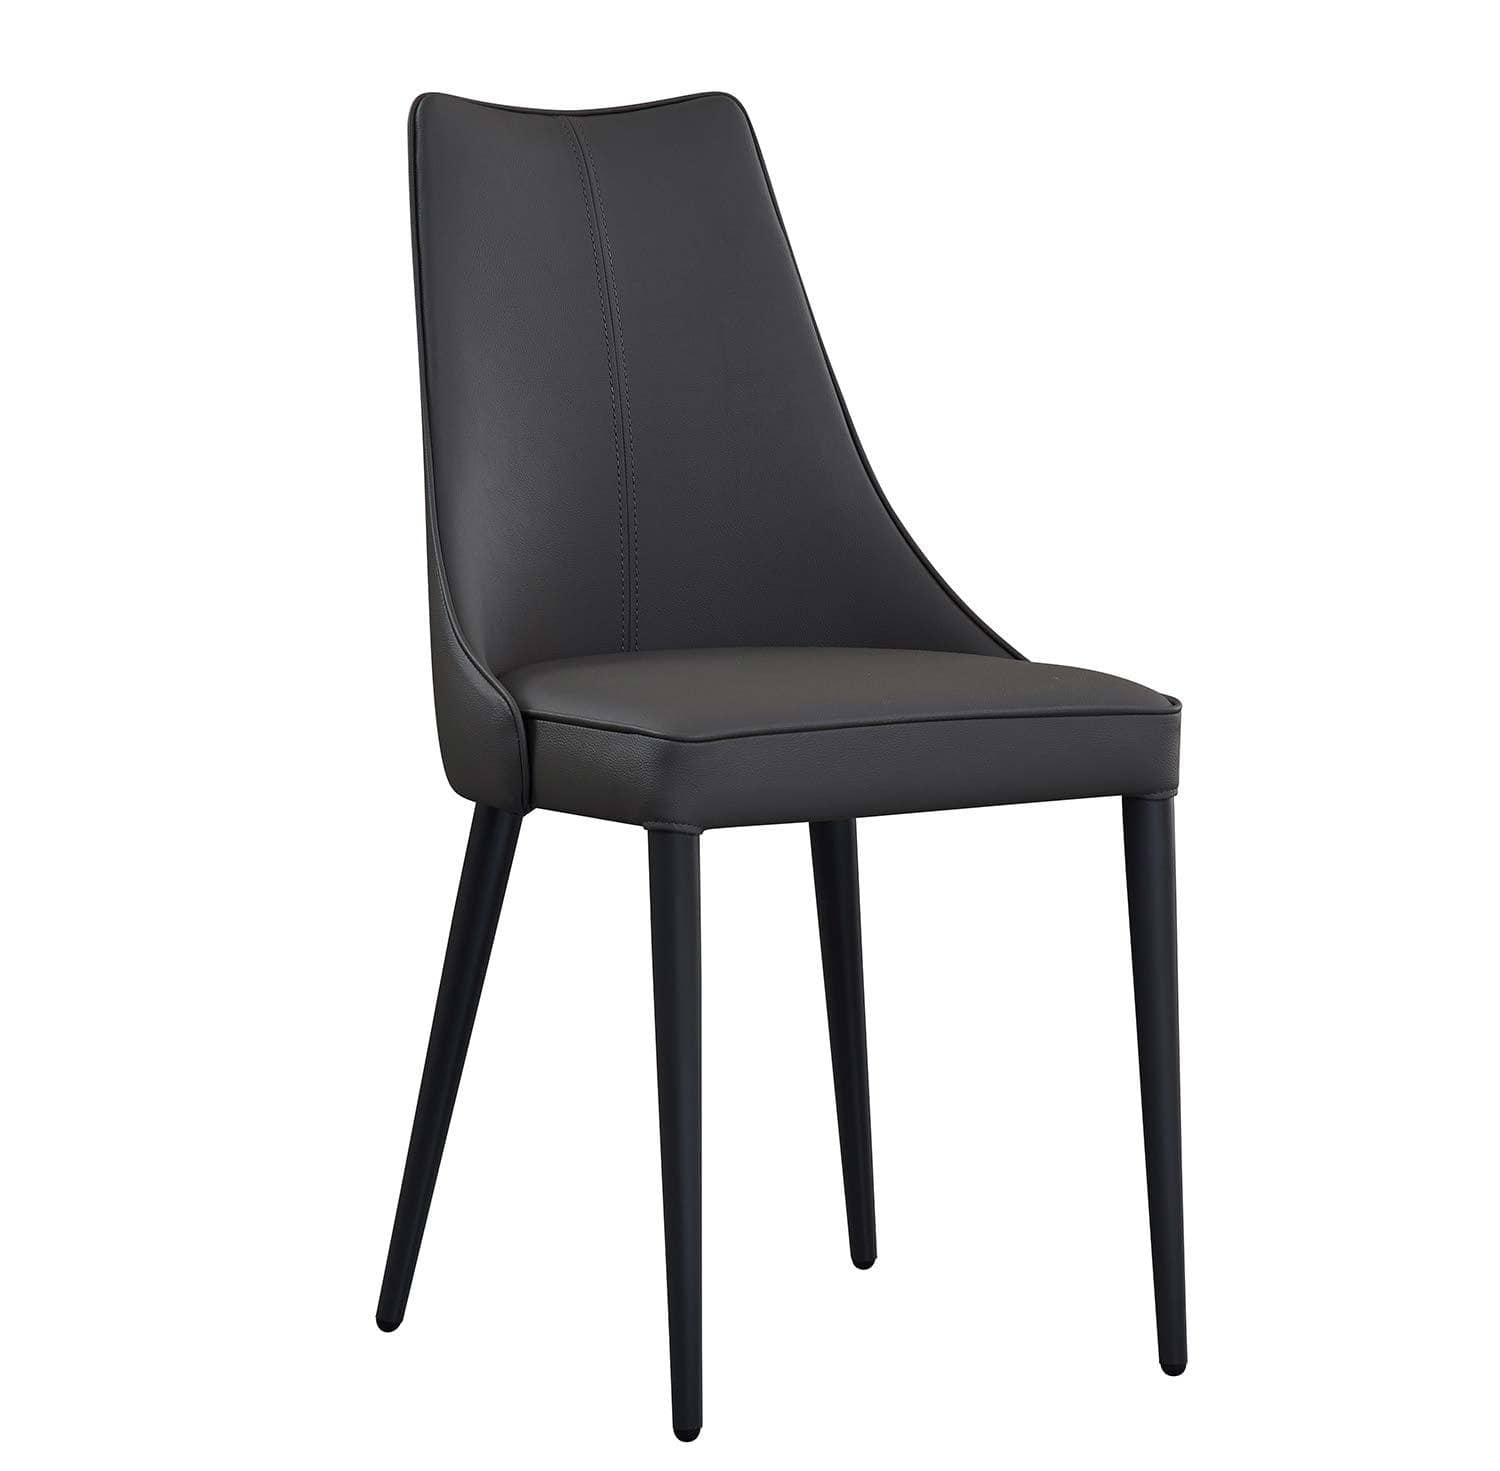 J and M Furniture Dining Chair Bosa/Moderna Dining Chair in Grey